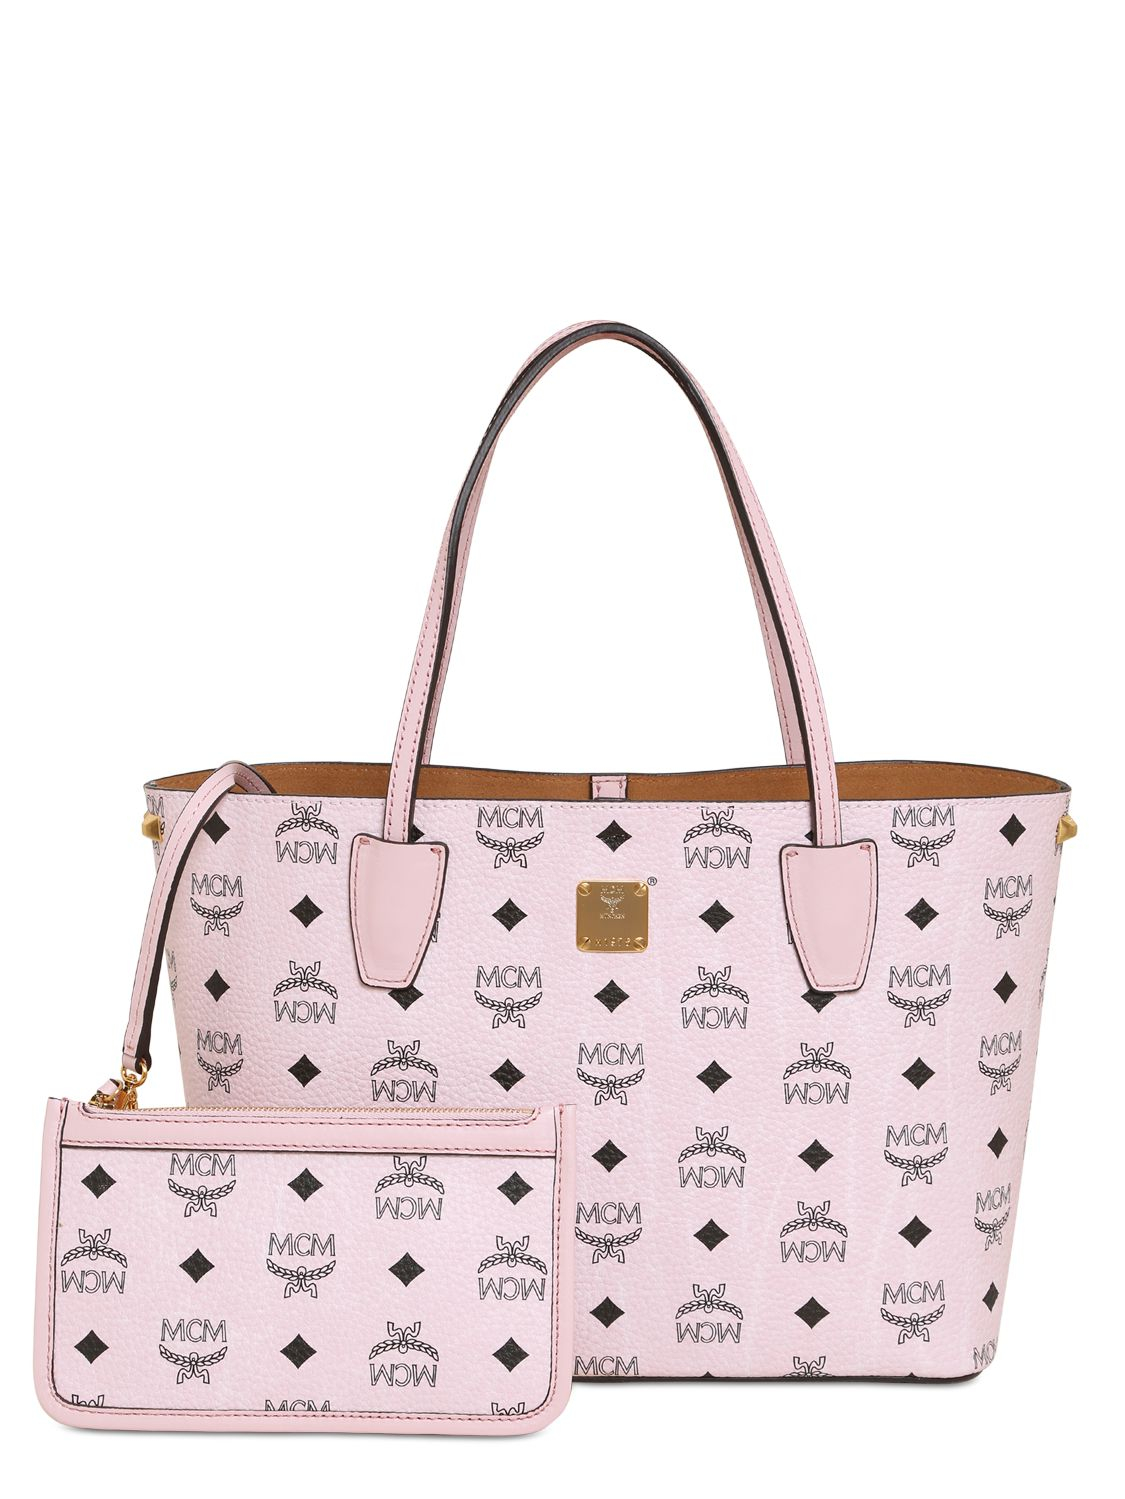 Mcm Small Printed Faux Leather Tote Bag in Pink | Lyst